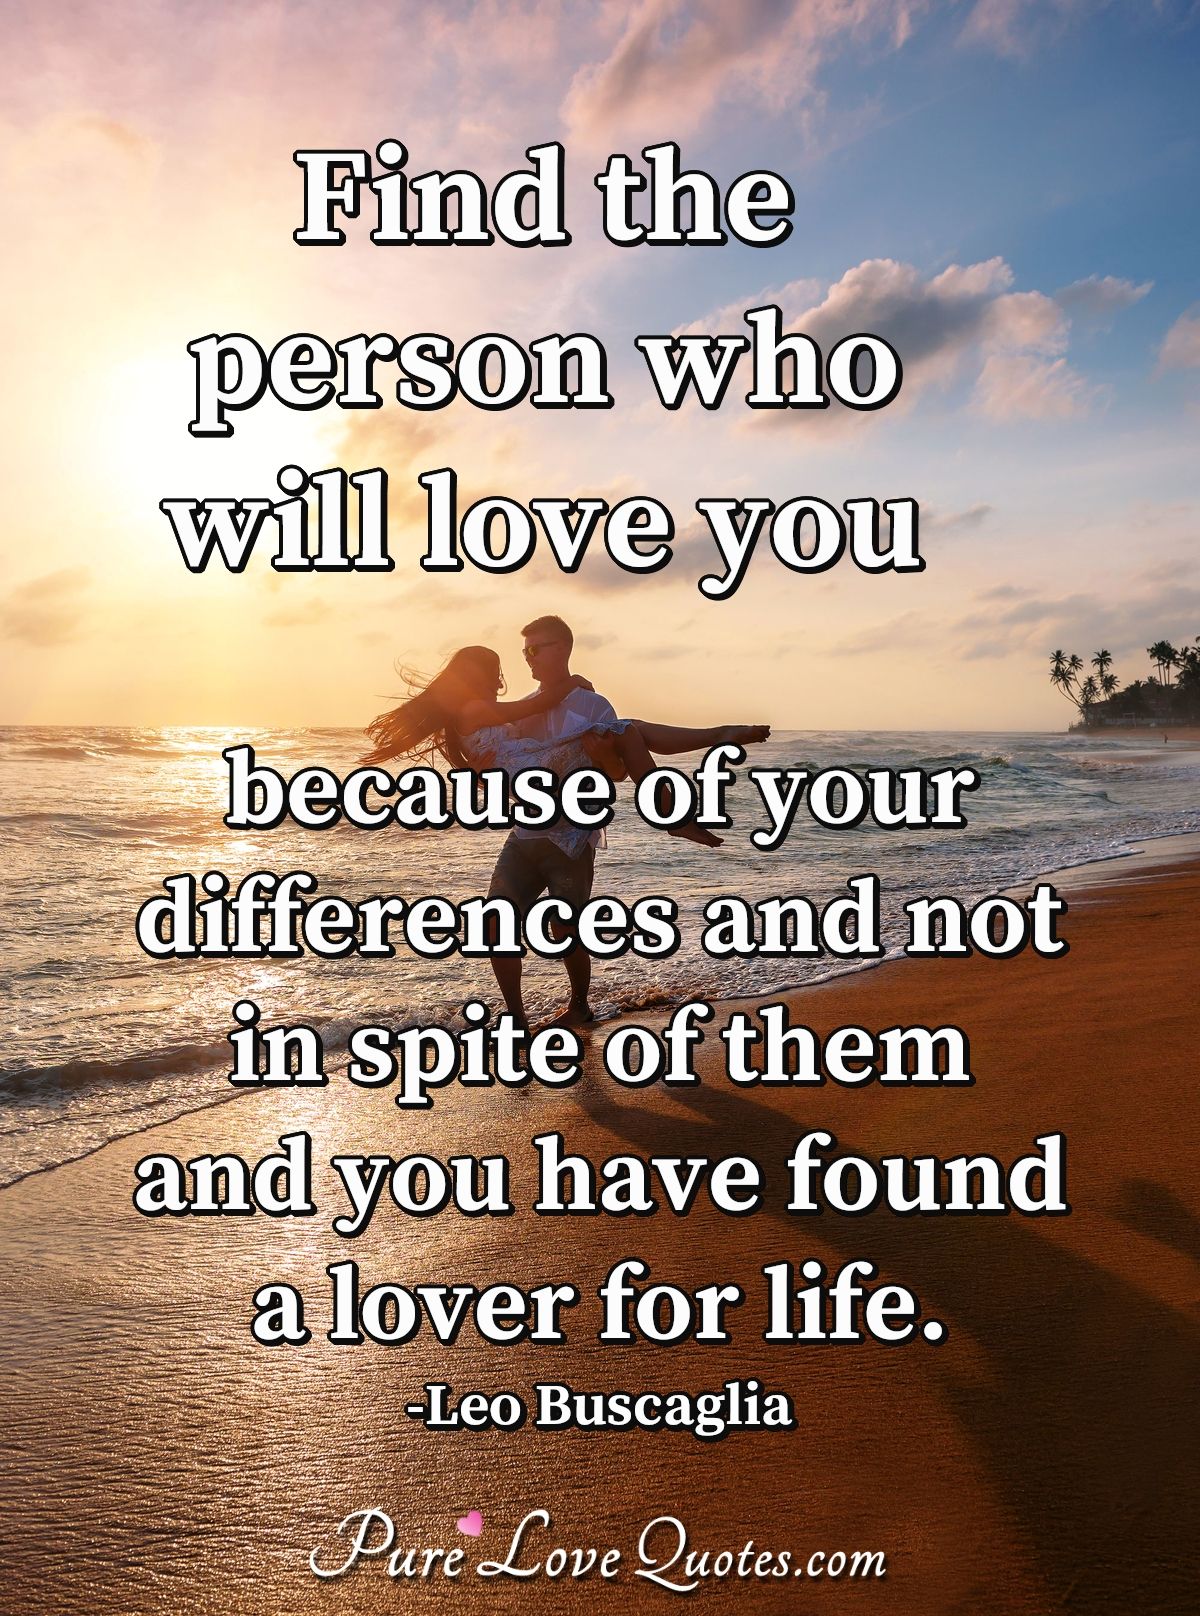 Find the person who will love you because of your differences and not